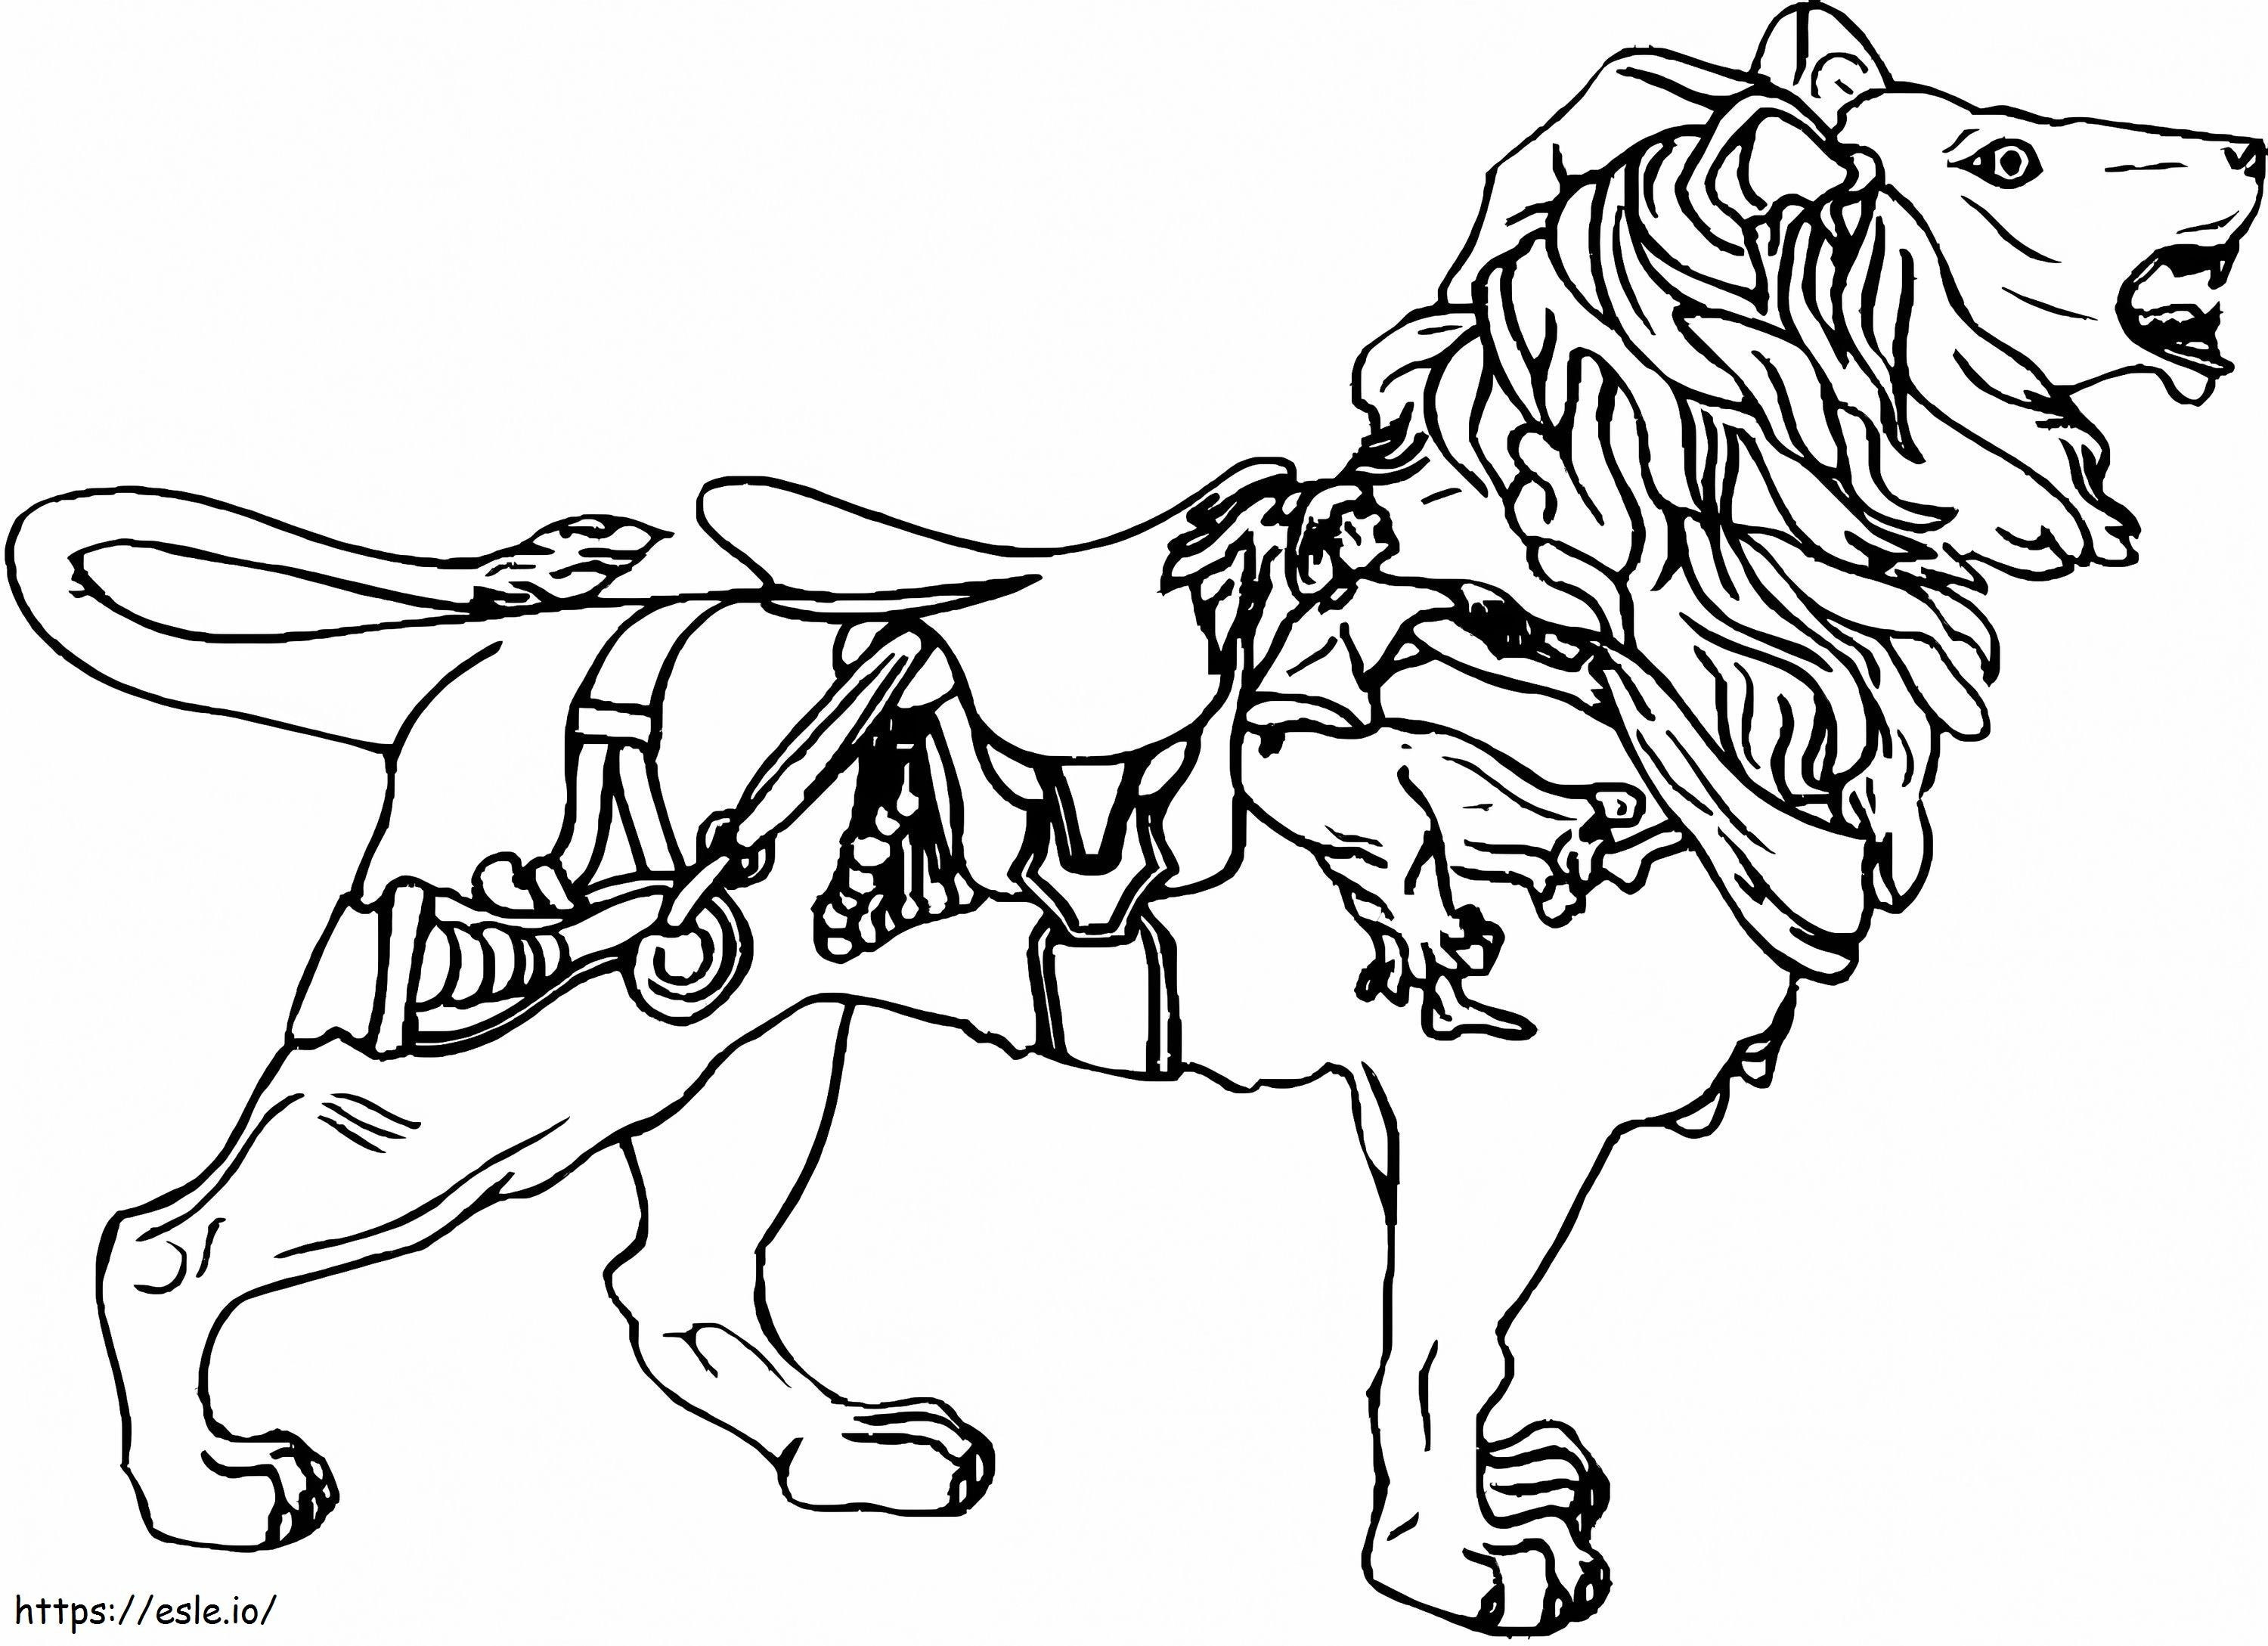 Carousel Lion coloring page